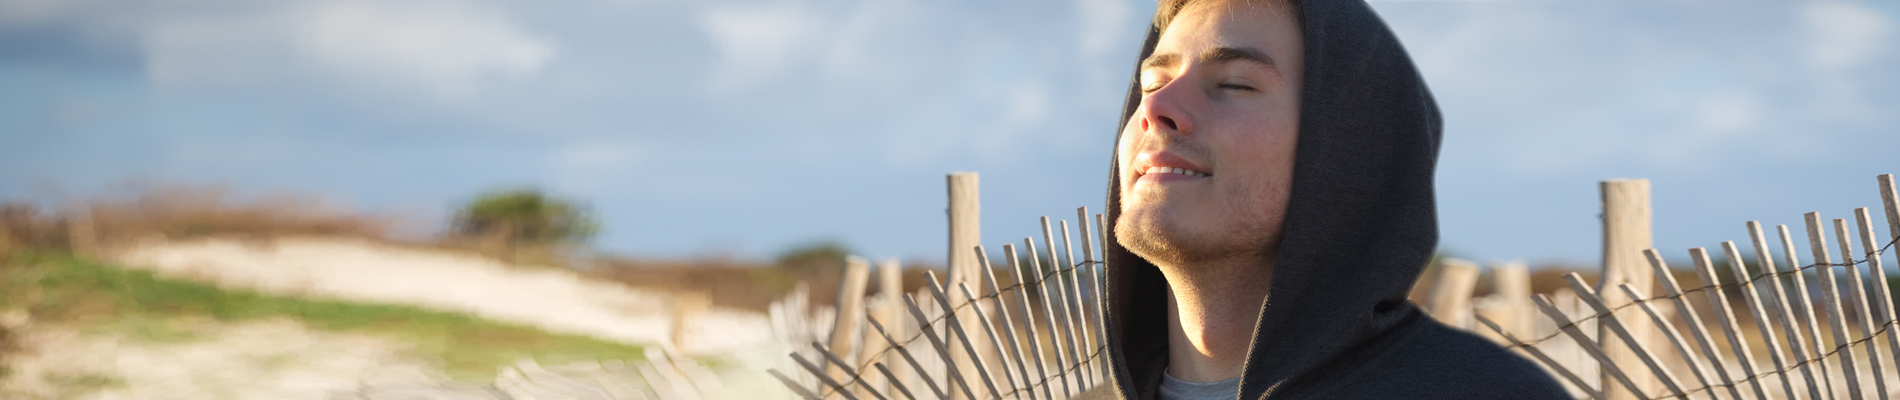 A man in a hoody, head tilted up into the sunlight next to a fence along sand dunes